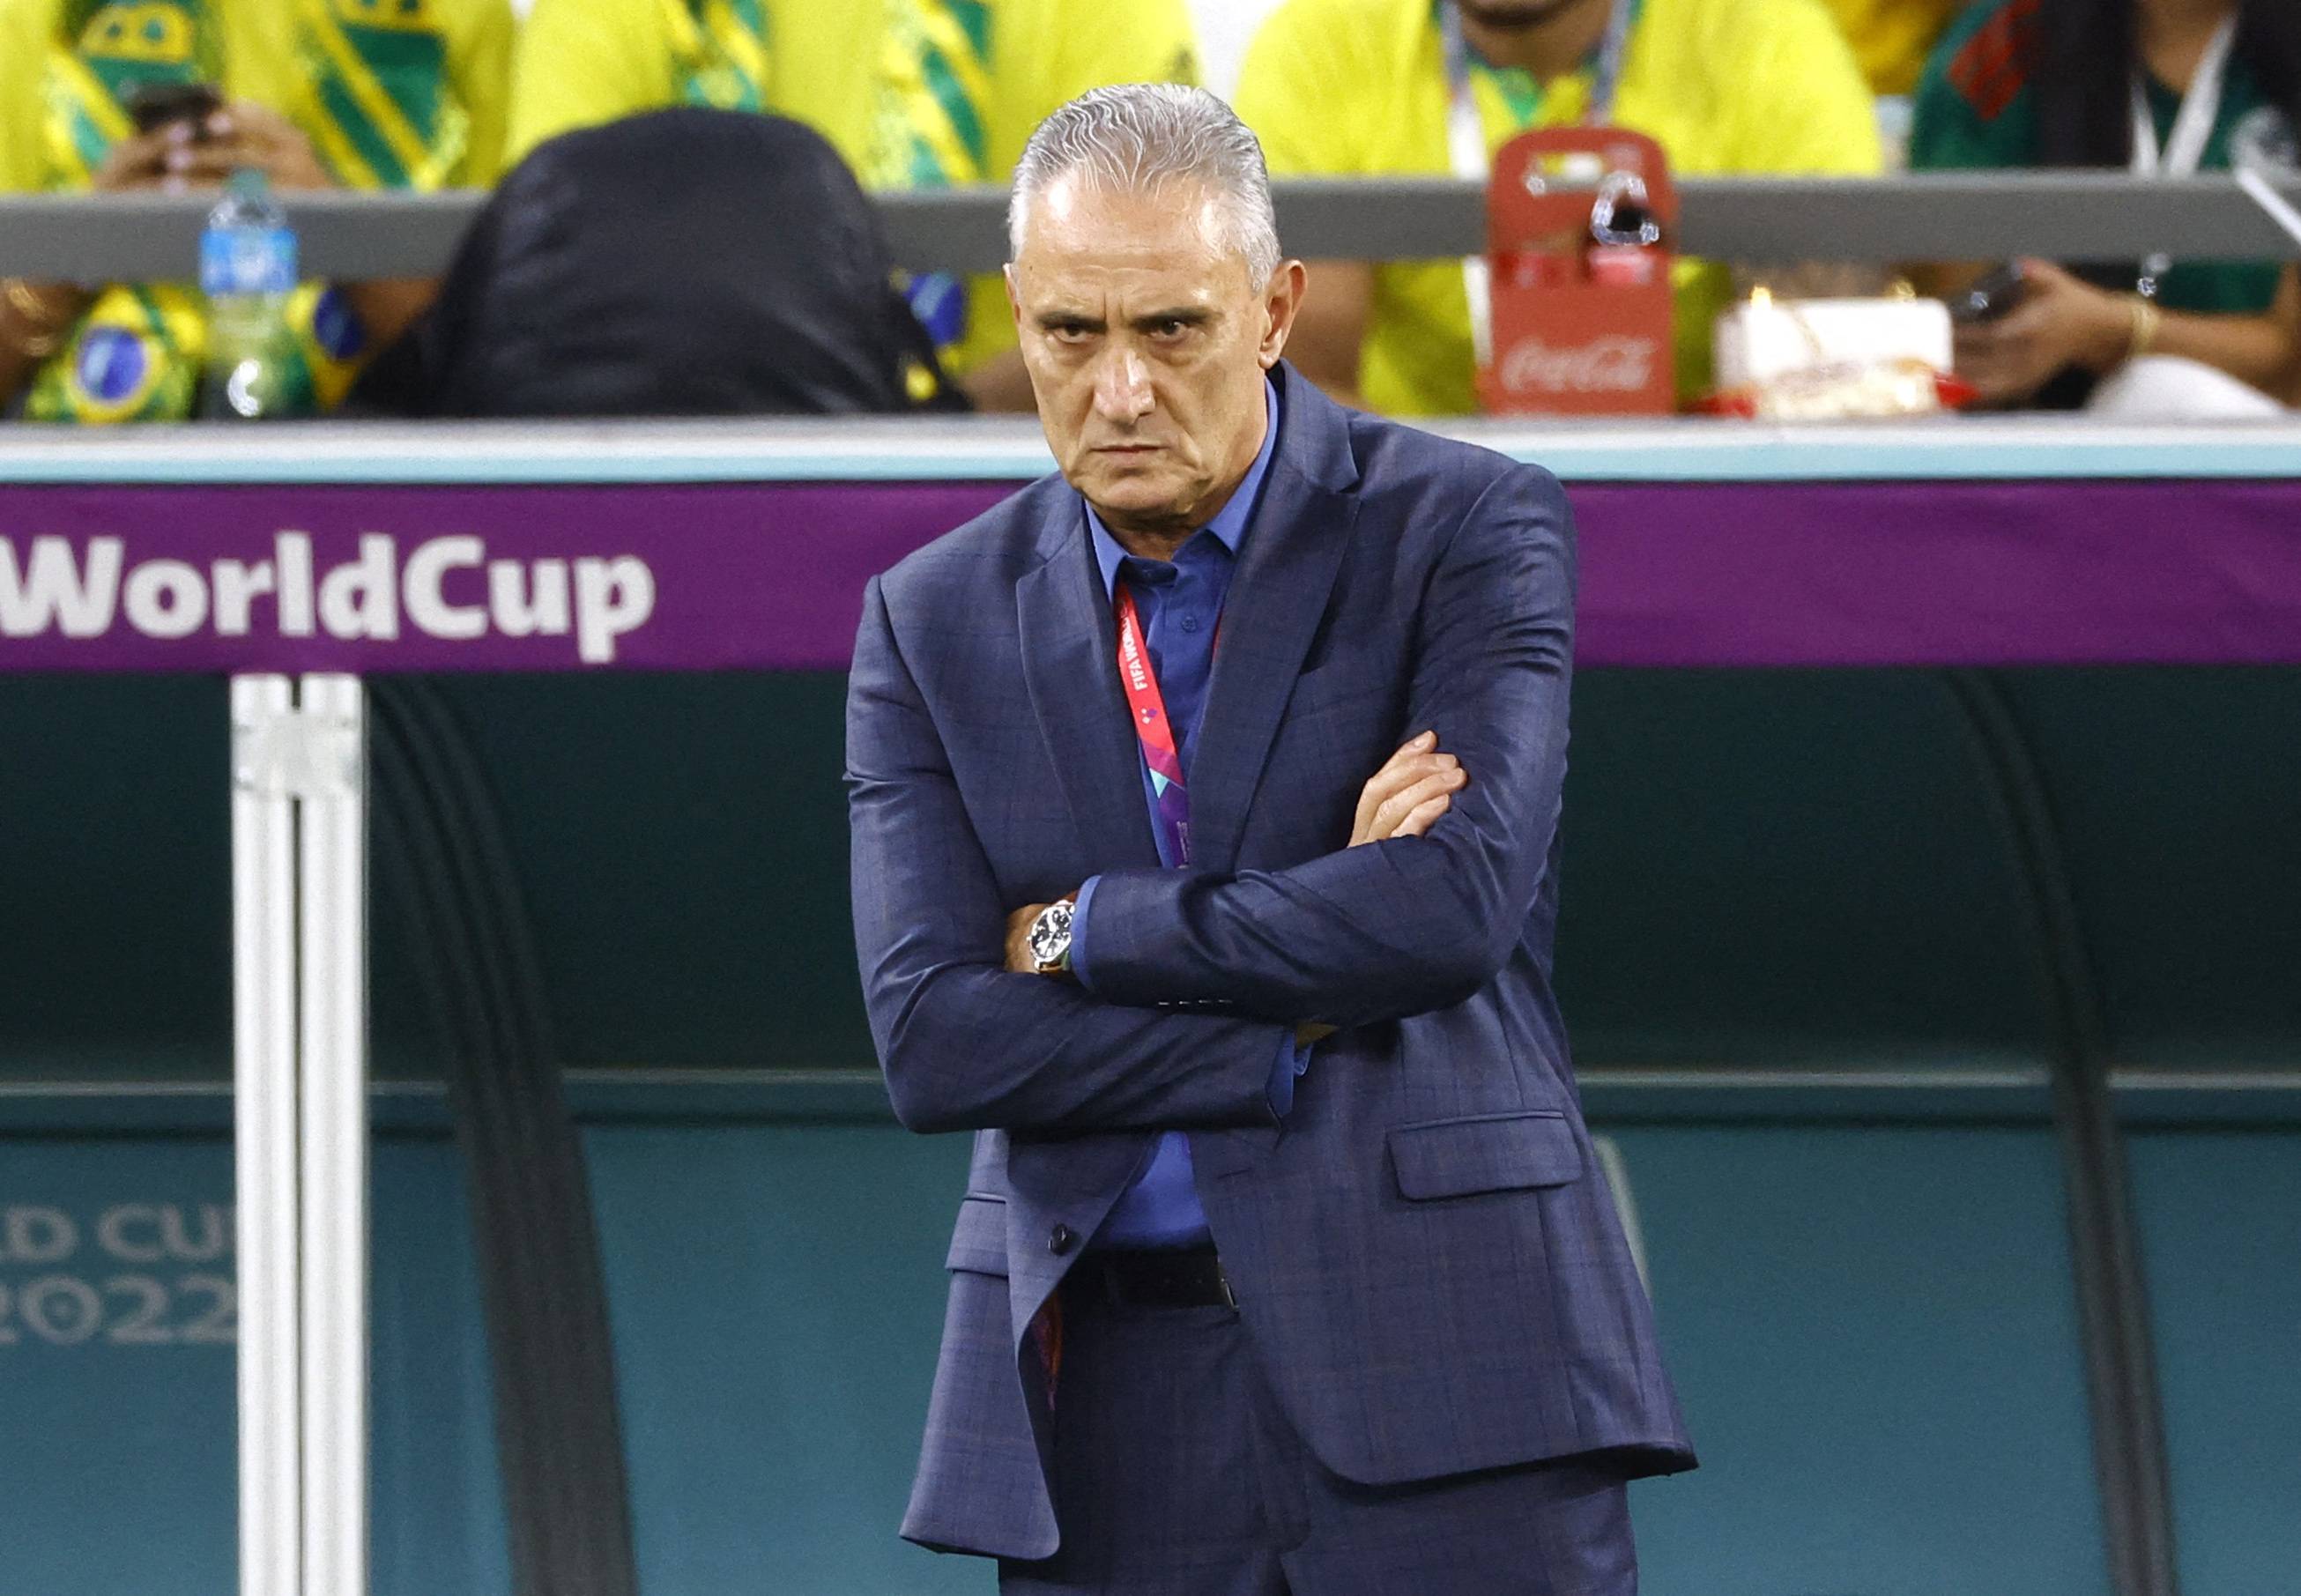 While a European coach would boost Brazil's World Cup hopes, it's